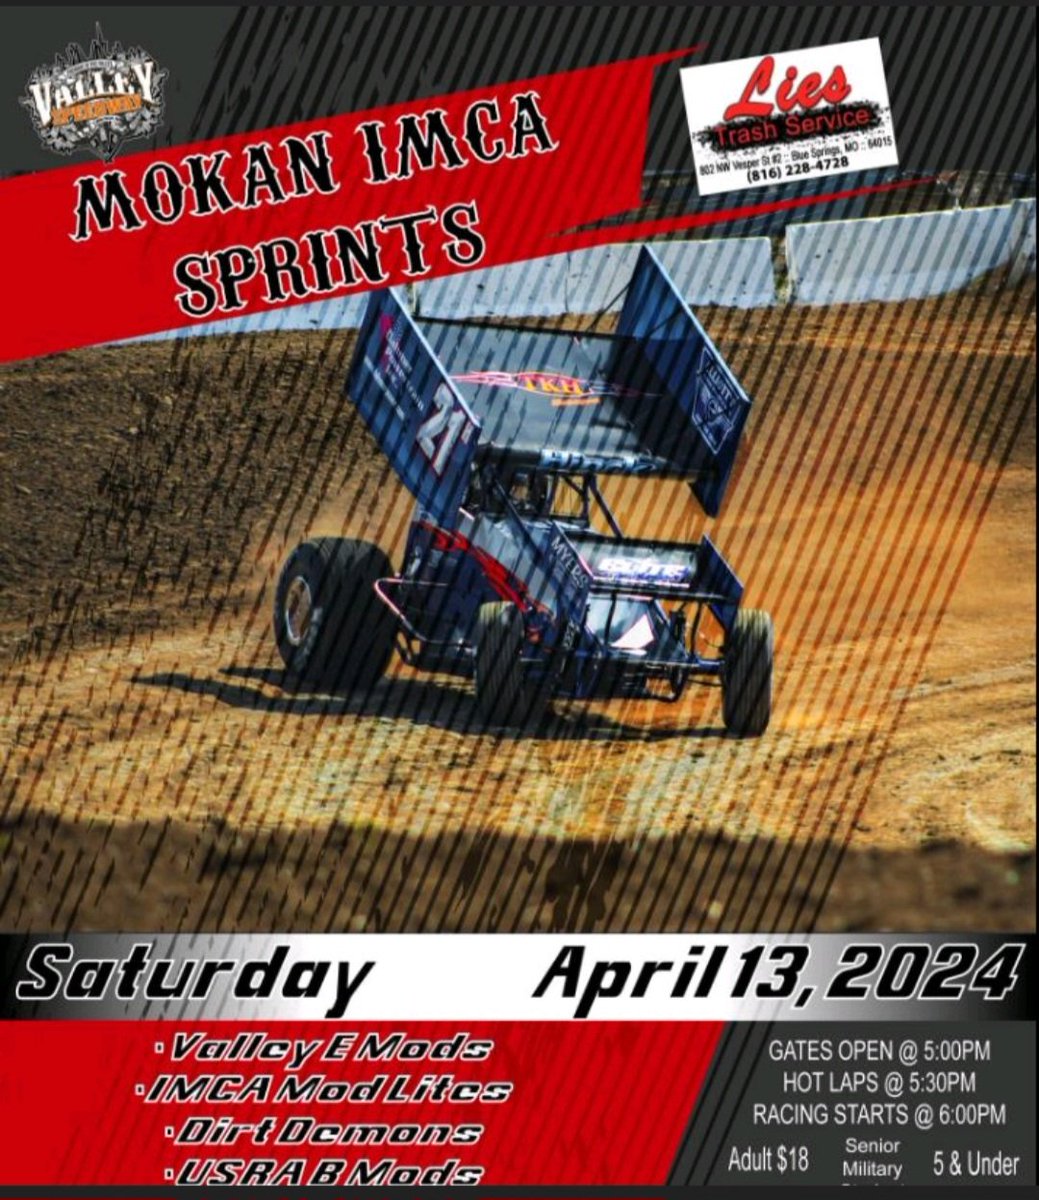 First IMCA sprint car race ever! Headed out to Valley Speedway to run with the @IMCA_racing Mokan 305 series!